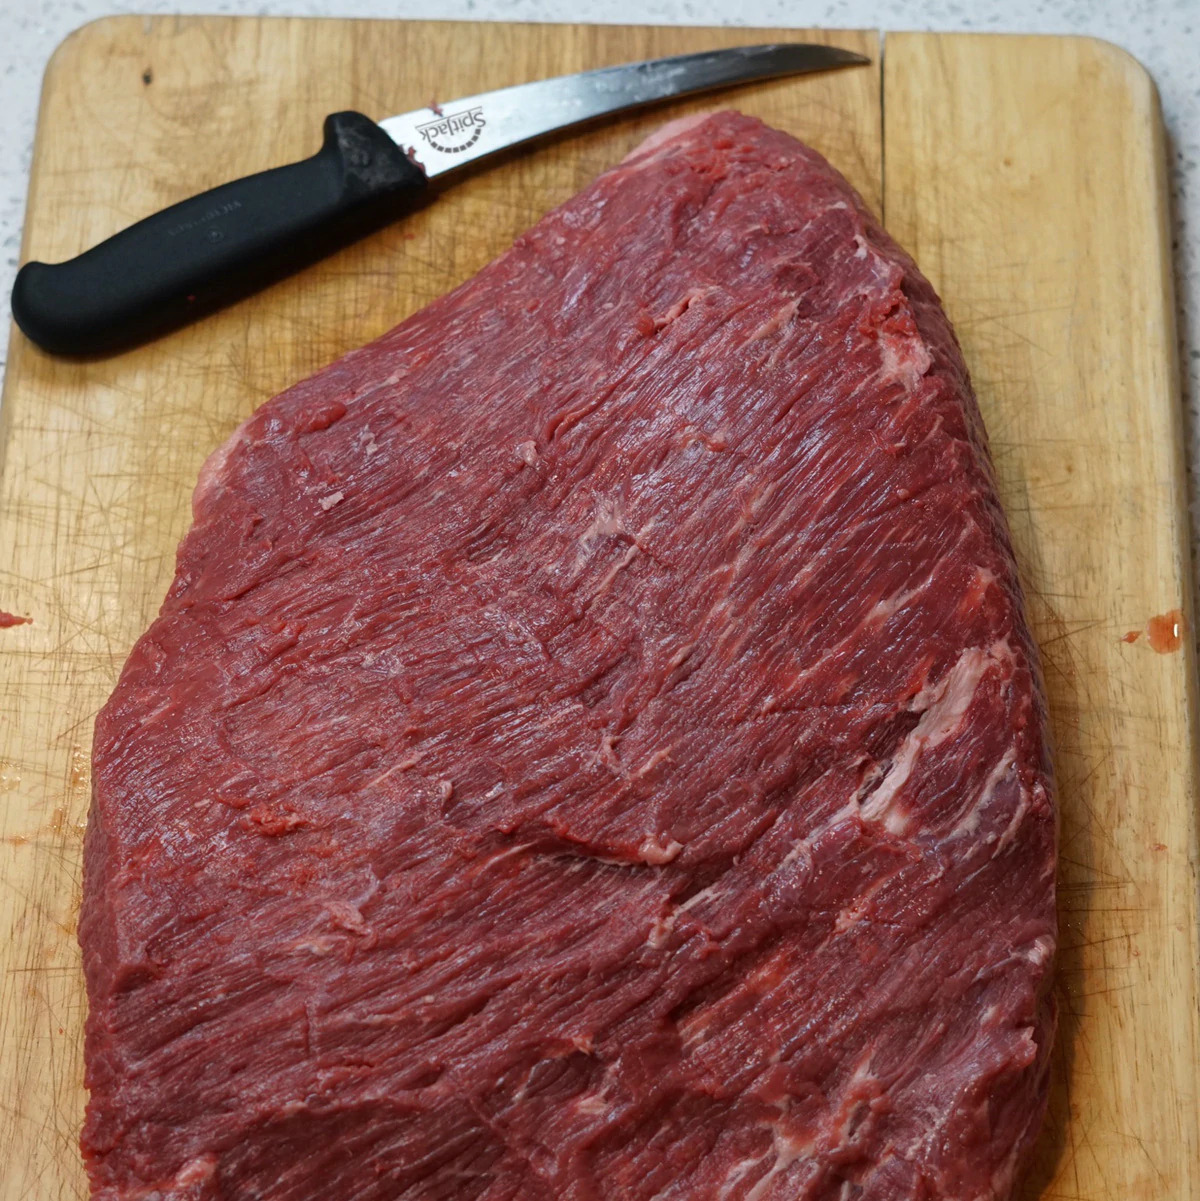 https://mdbbqservices.com/wp-content/uploads/2022/05/SpitJack_6_Inch_Meat_Trimming_and_Boning_Knife_02.jpg